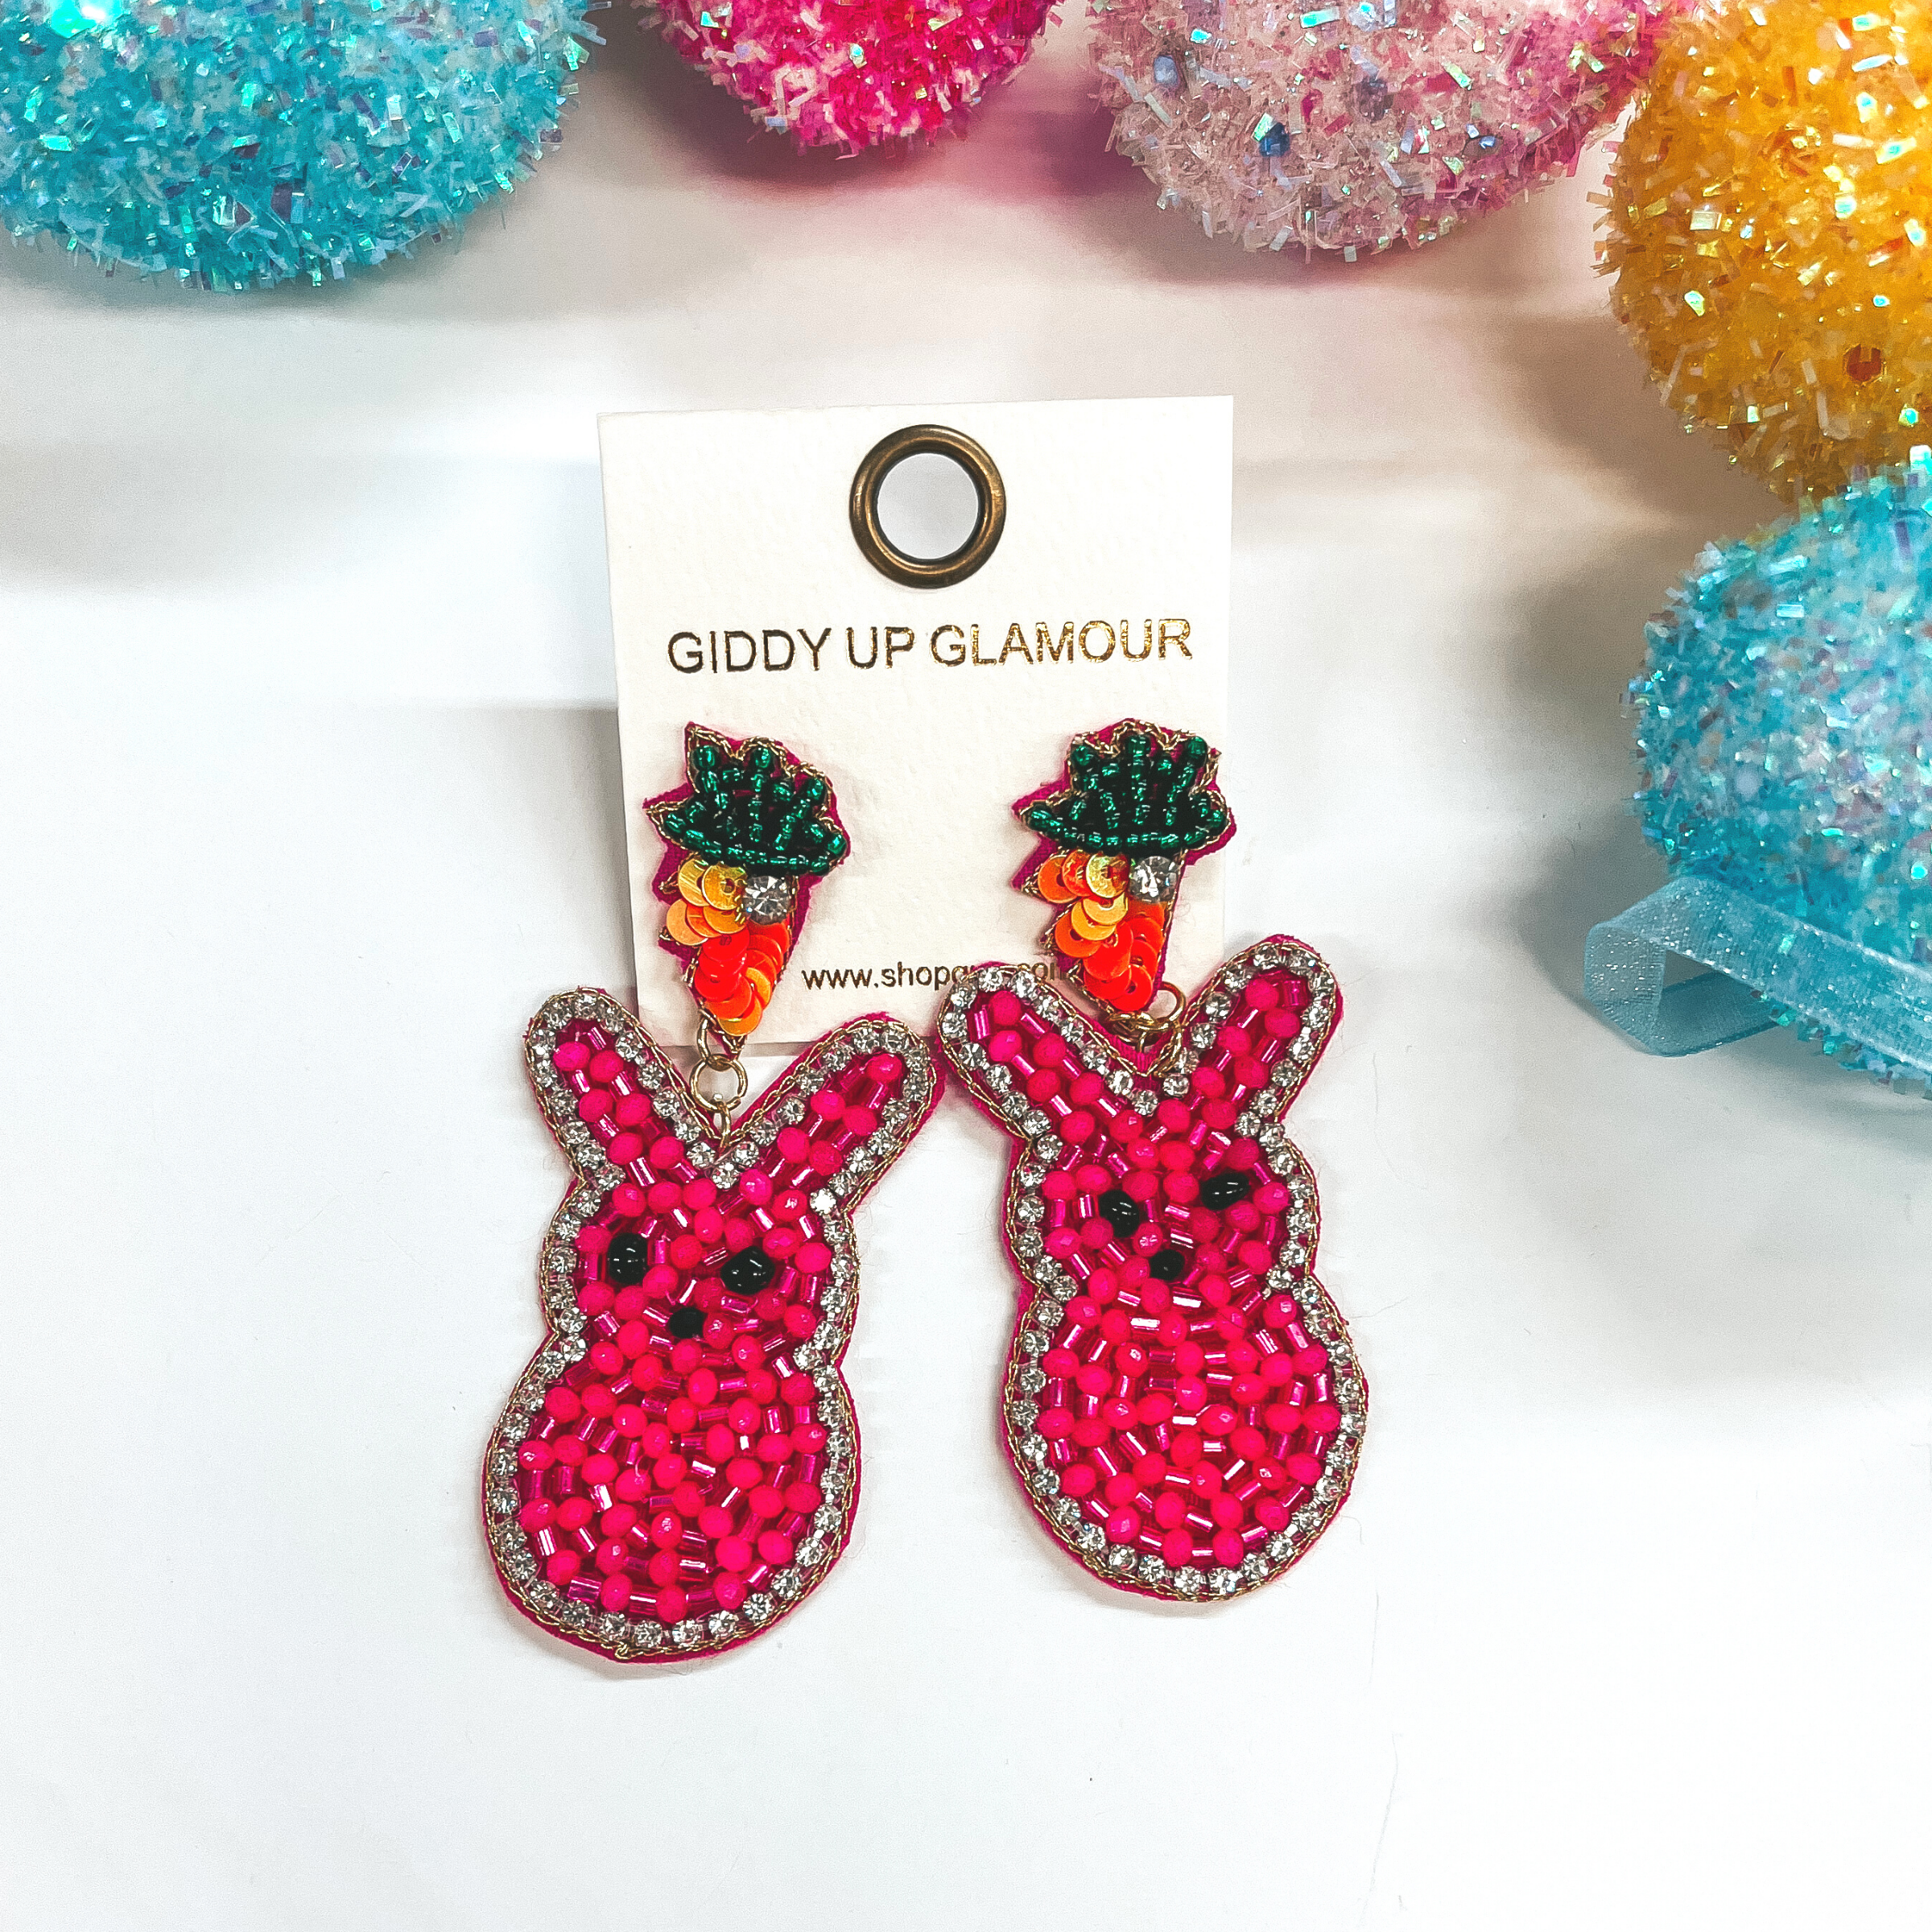 Beaded bunny rabbit earrings on a carrot post. Pictured on white background with colorful Easter eggs.